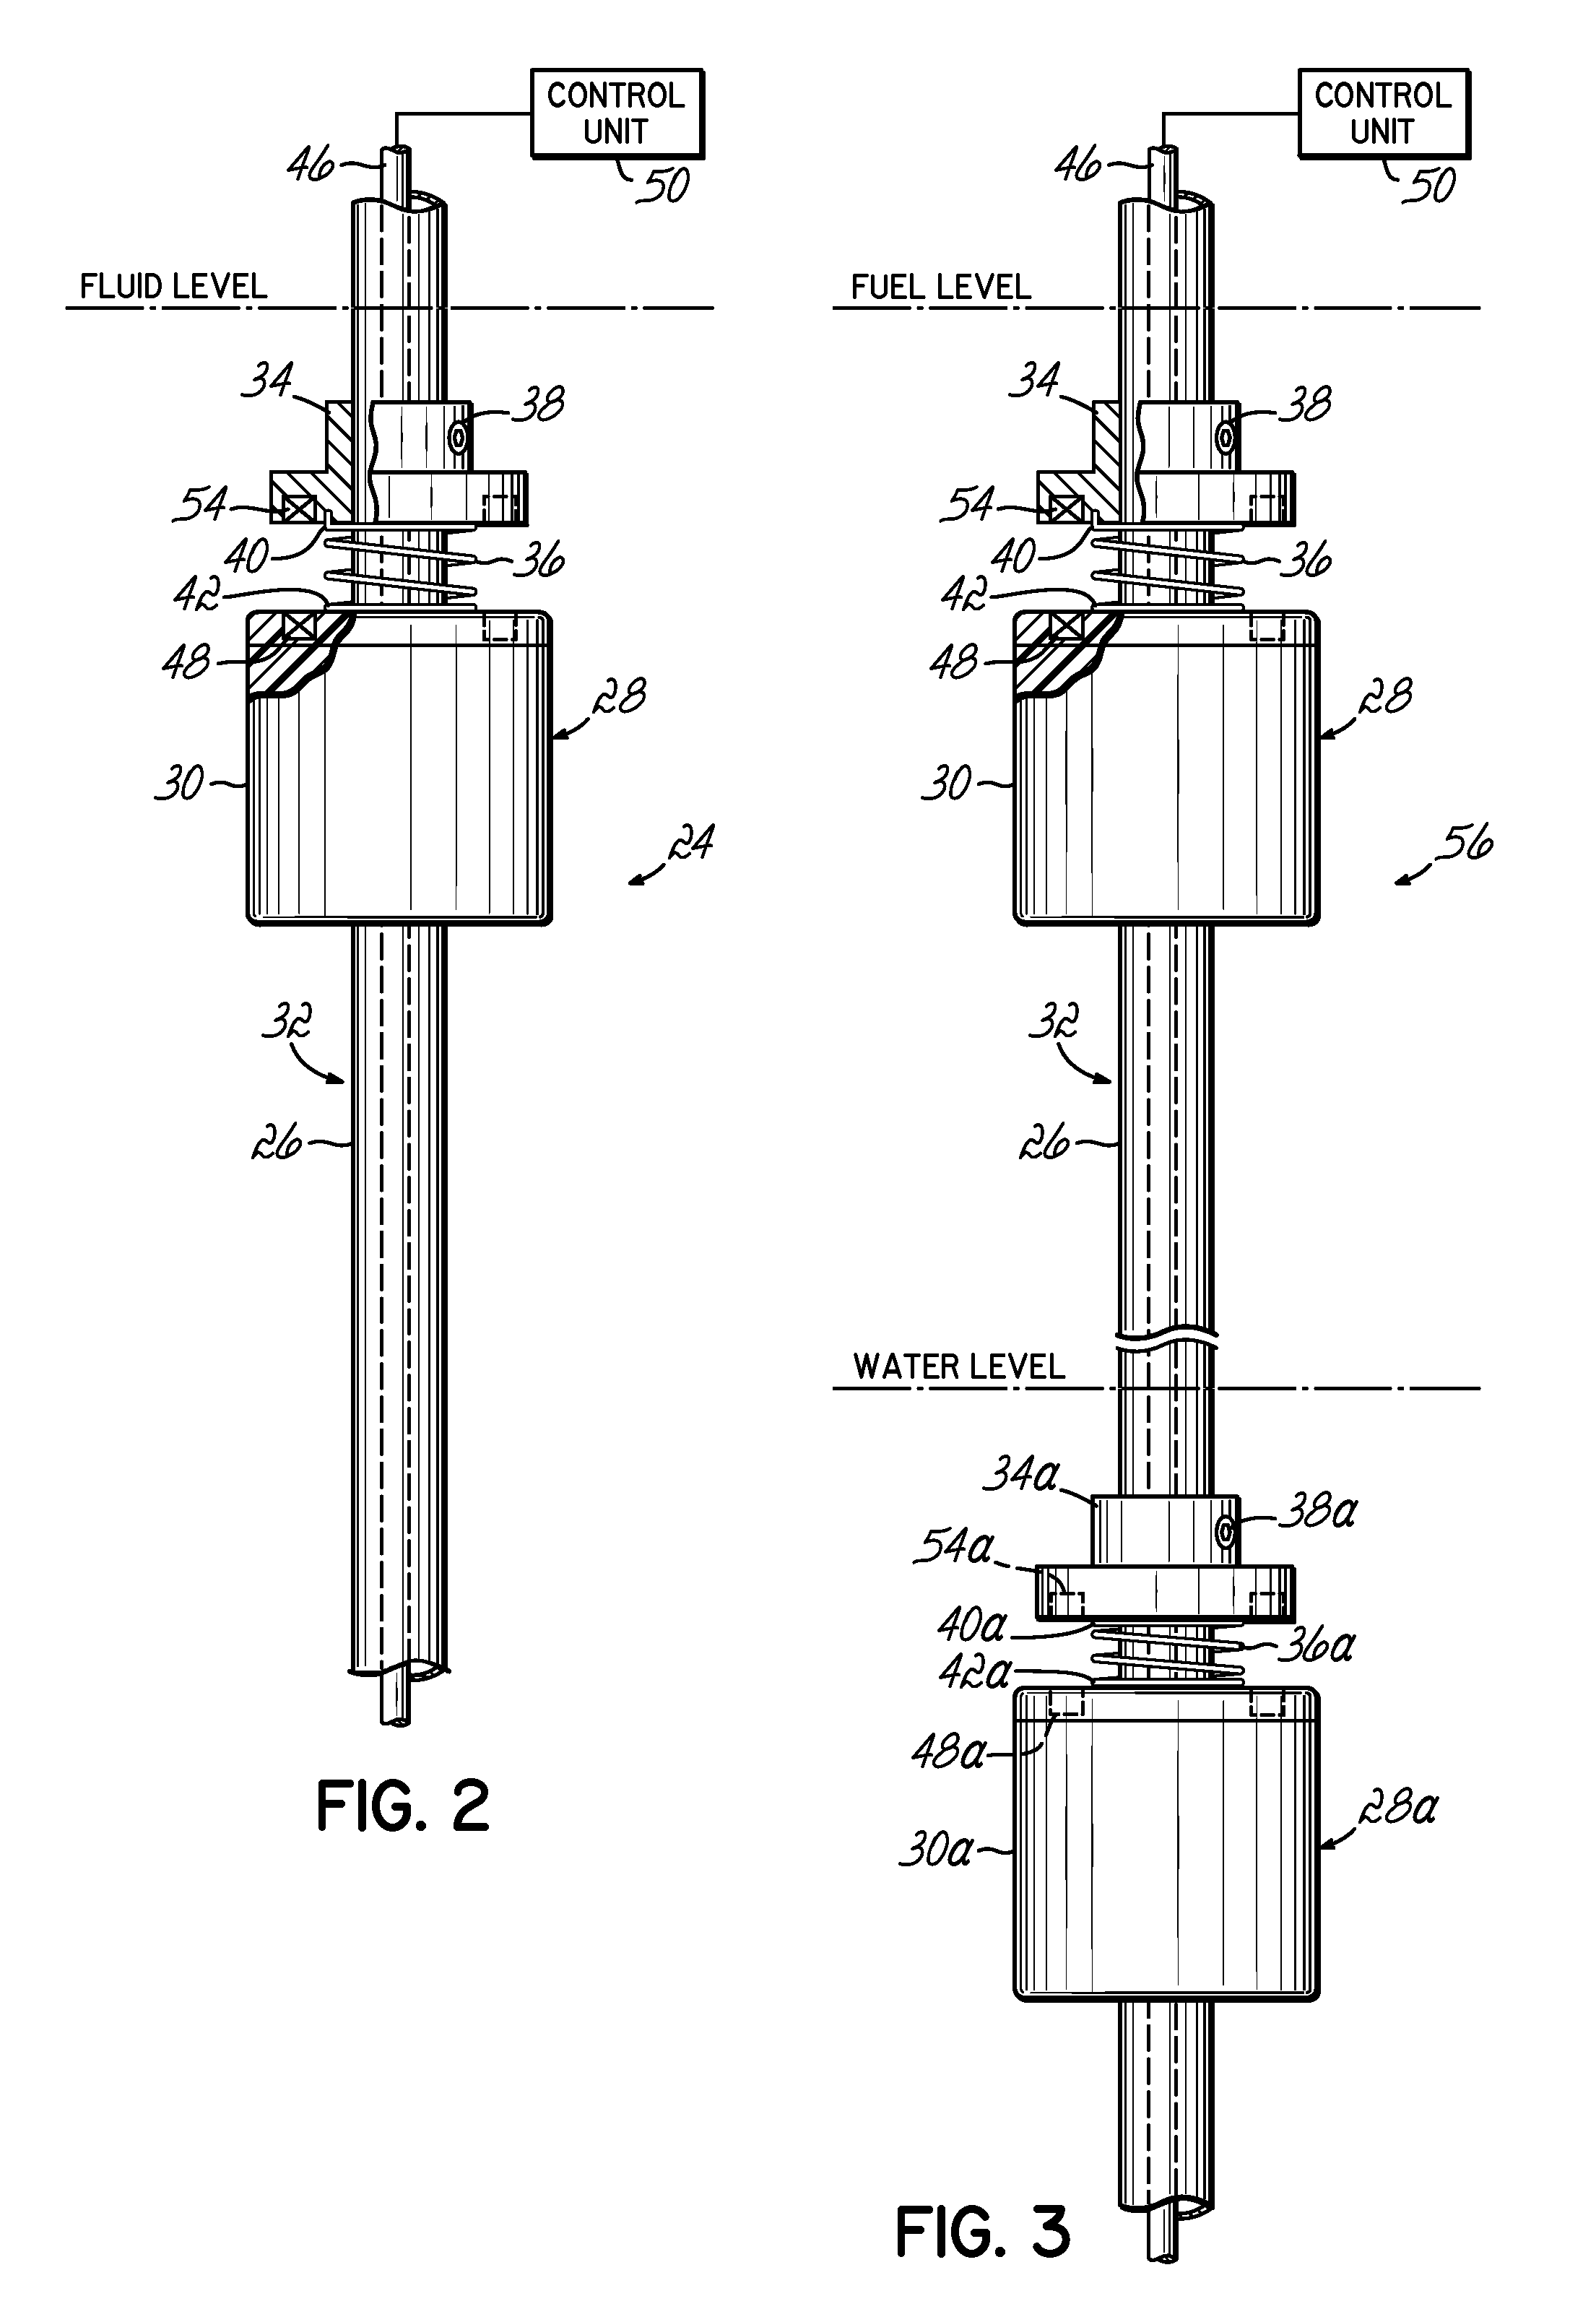 A method and apparatus for fluid density sensing